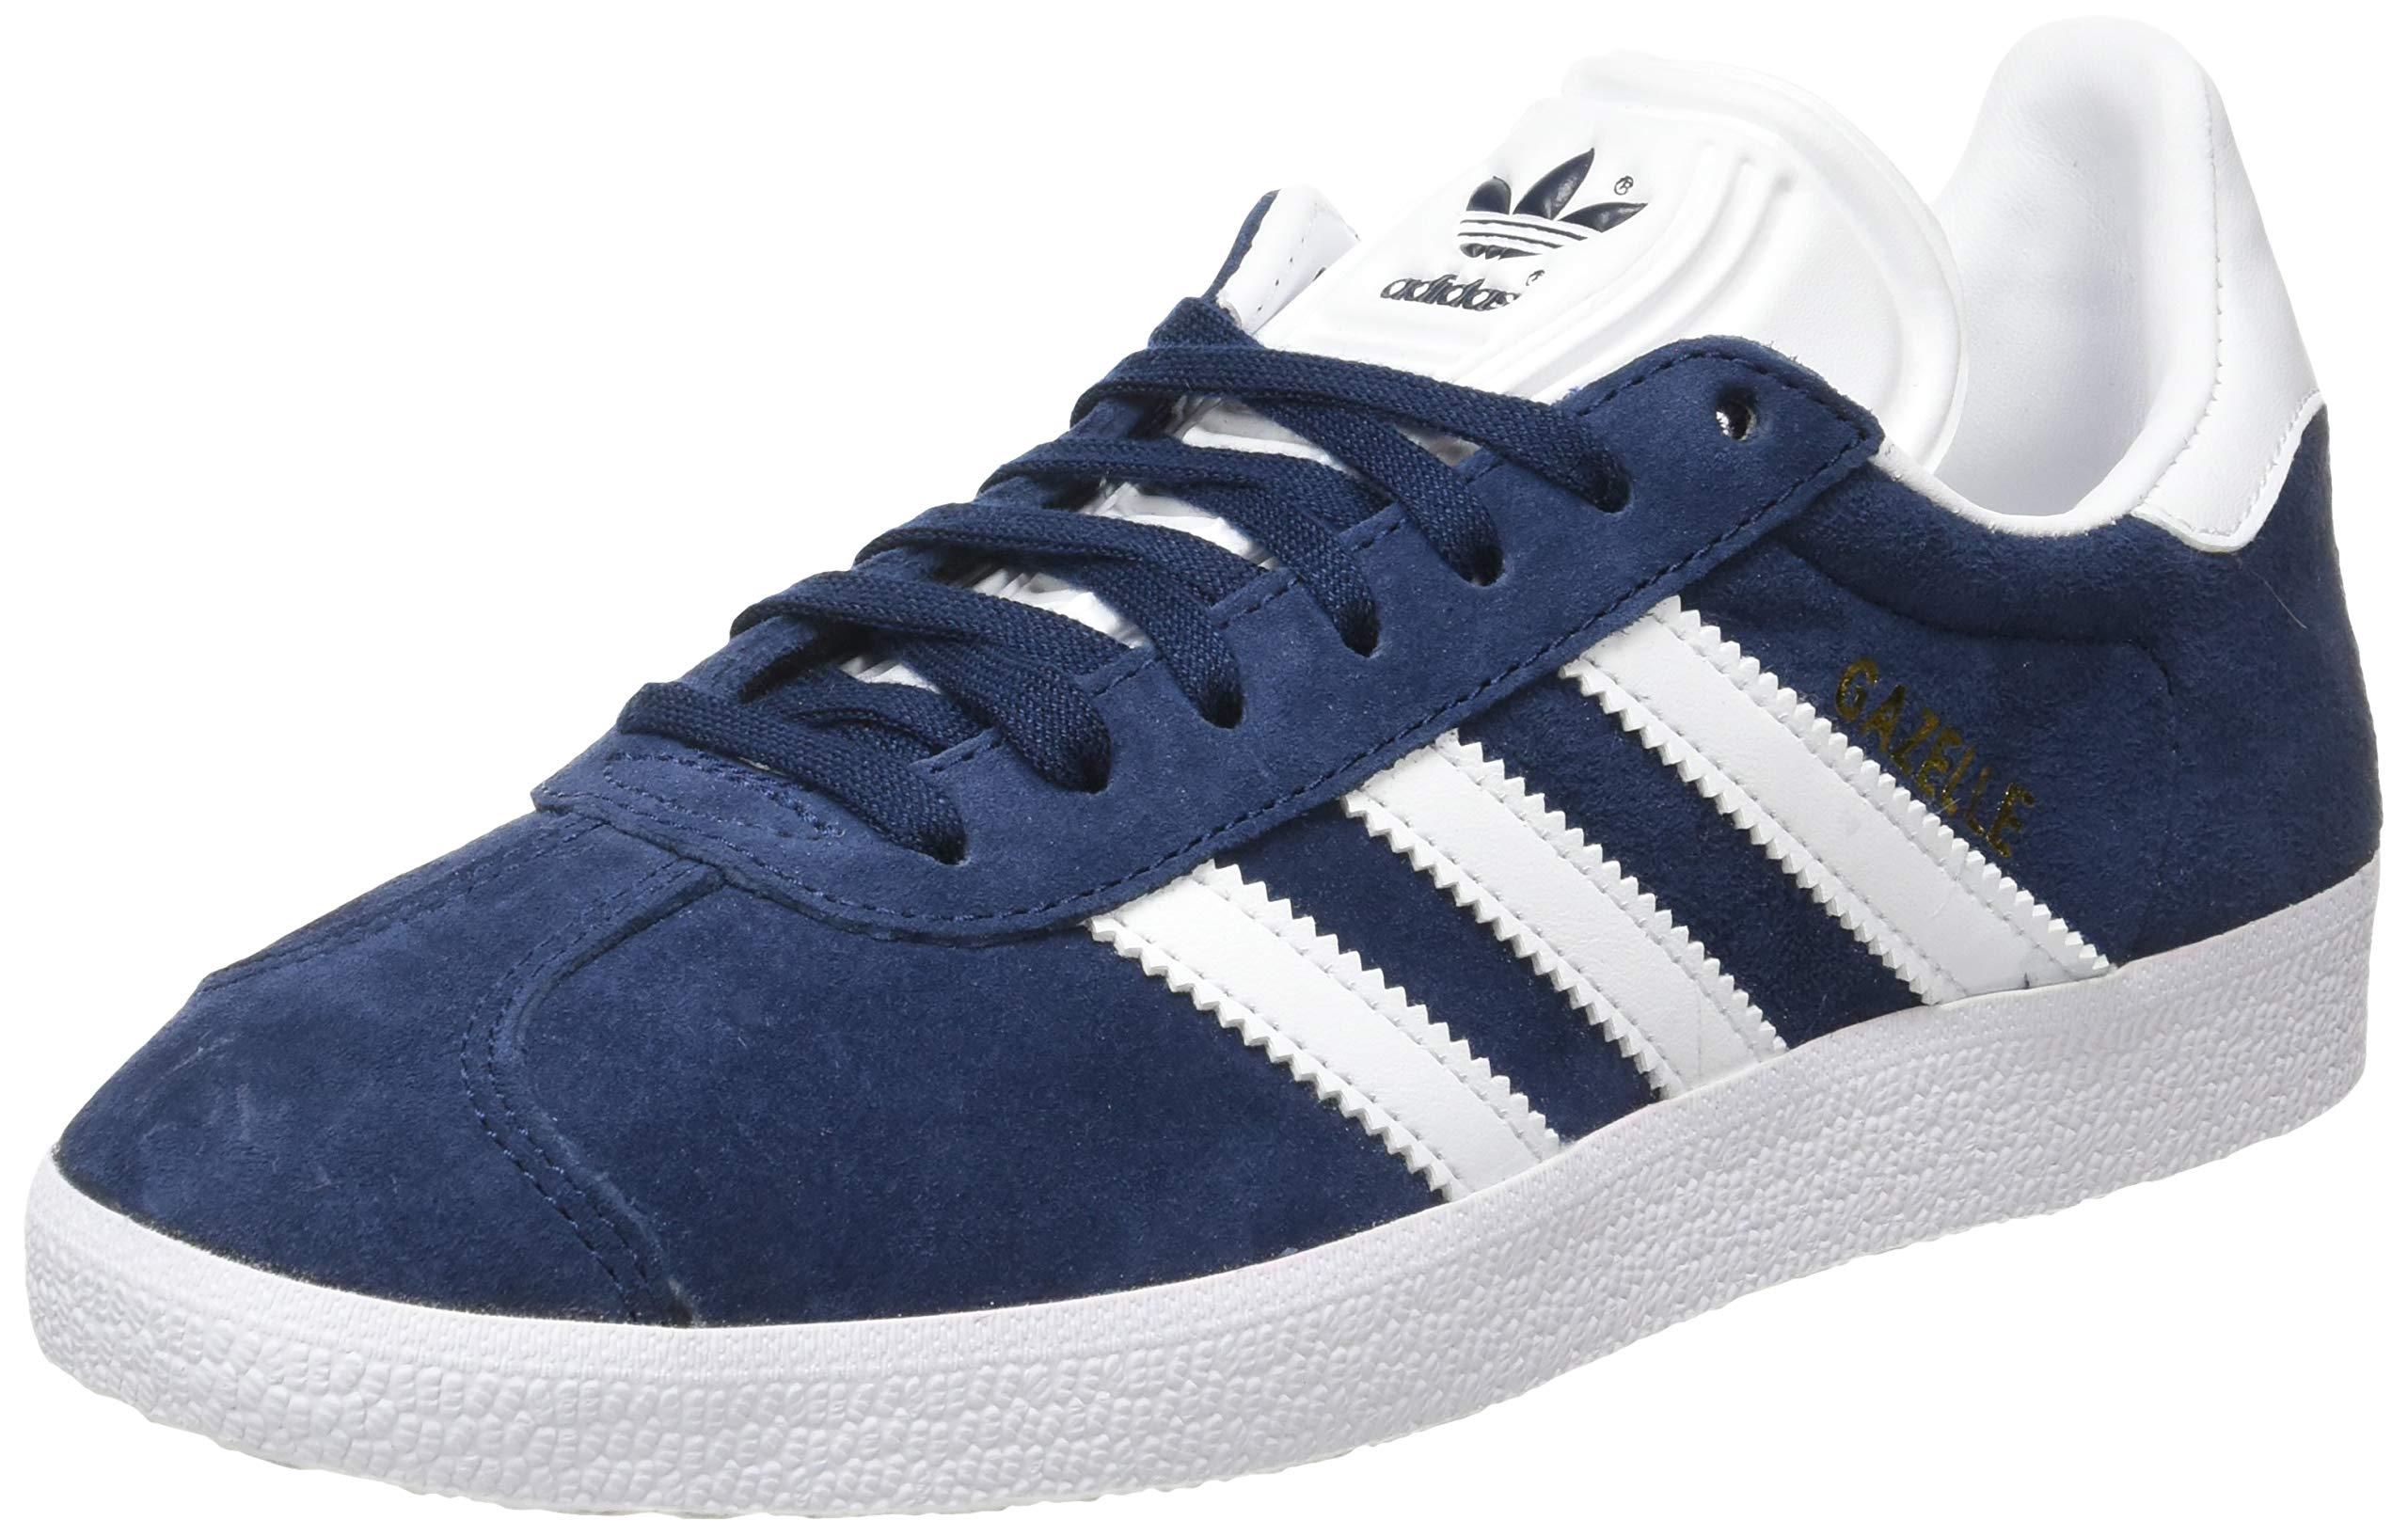 adidas Suede Gazelle Sneakers in Black for Men - Save 58% - Lyst